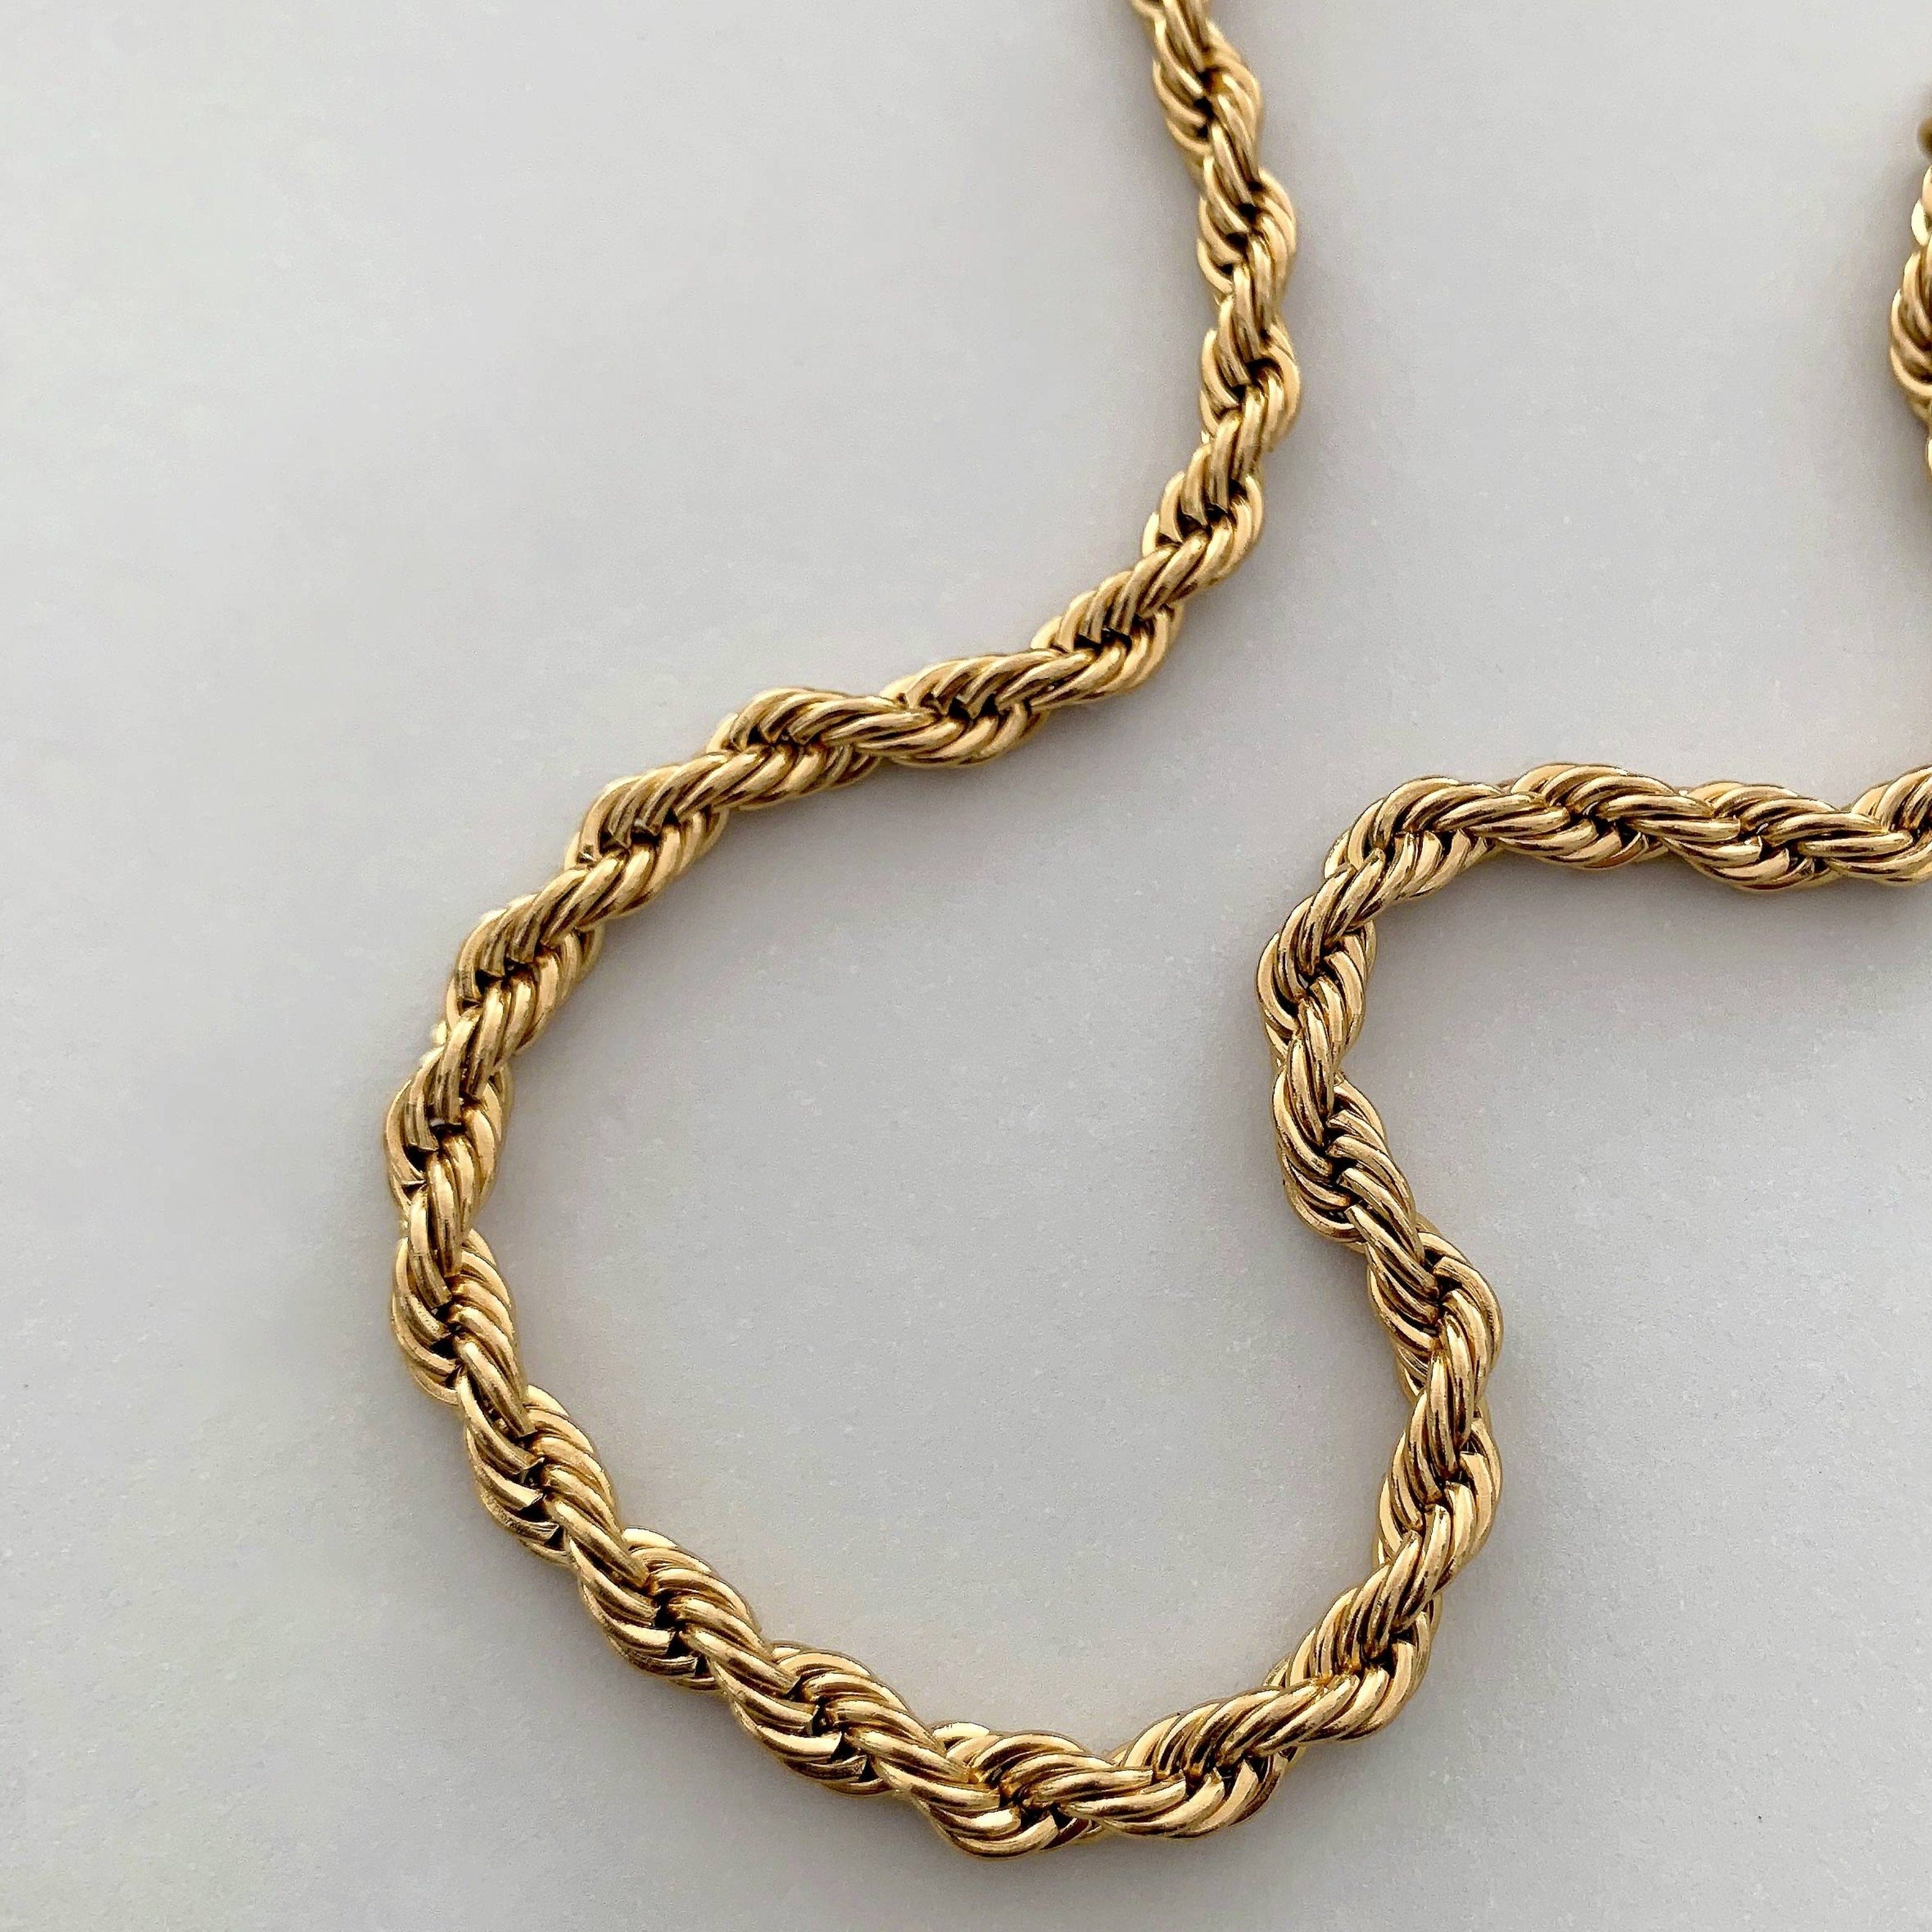 GOLD ROPE CHAIN NECKLACE - SAMPLE